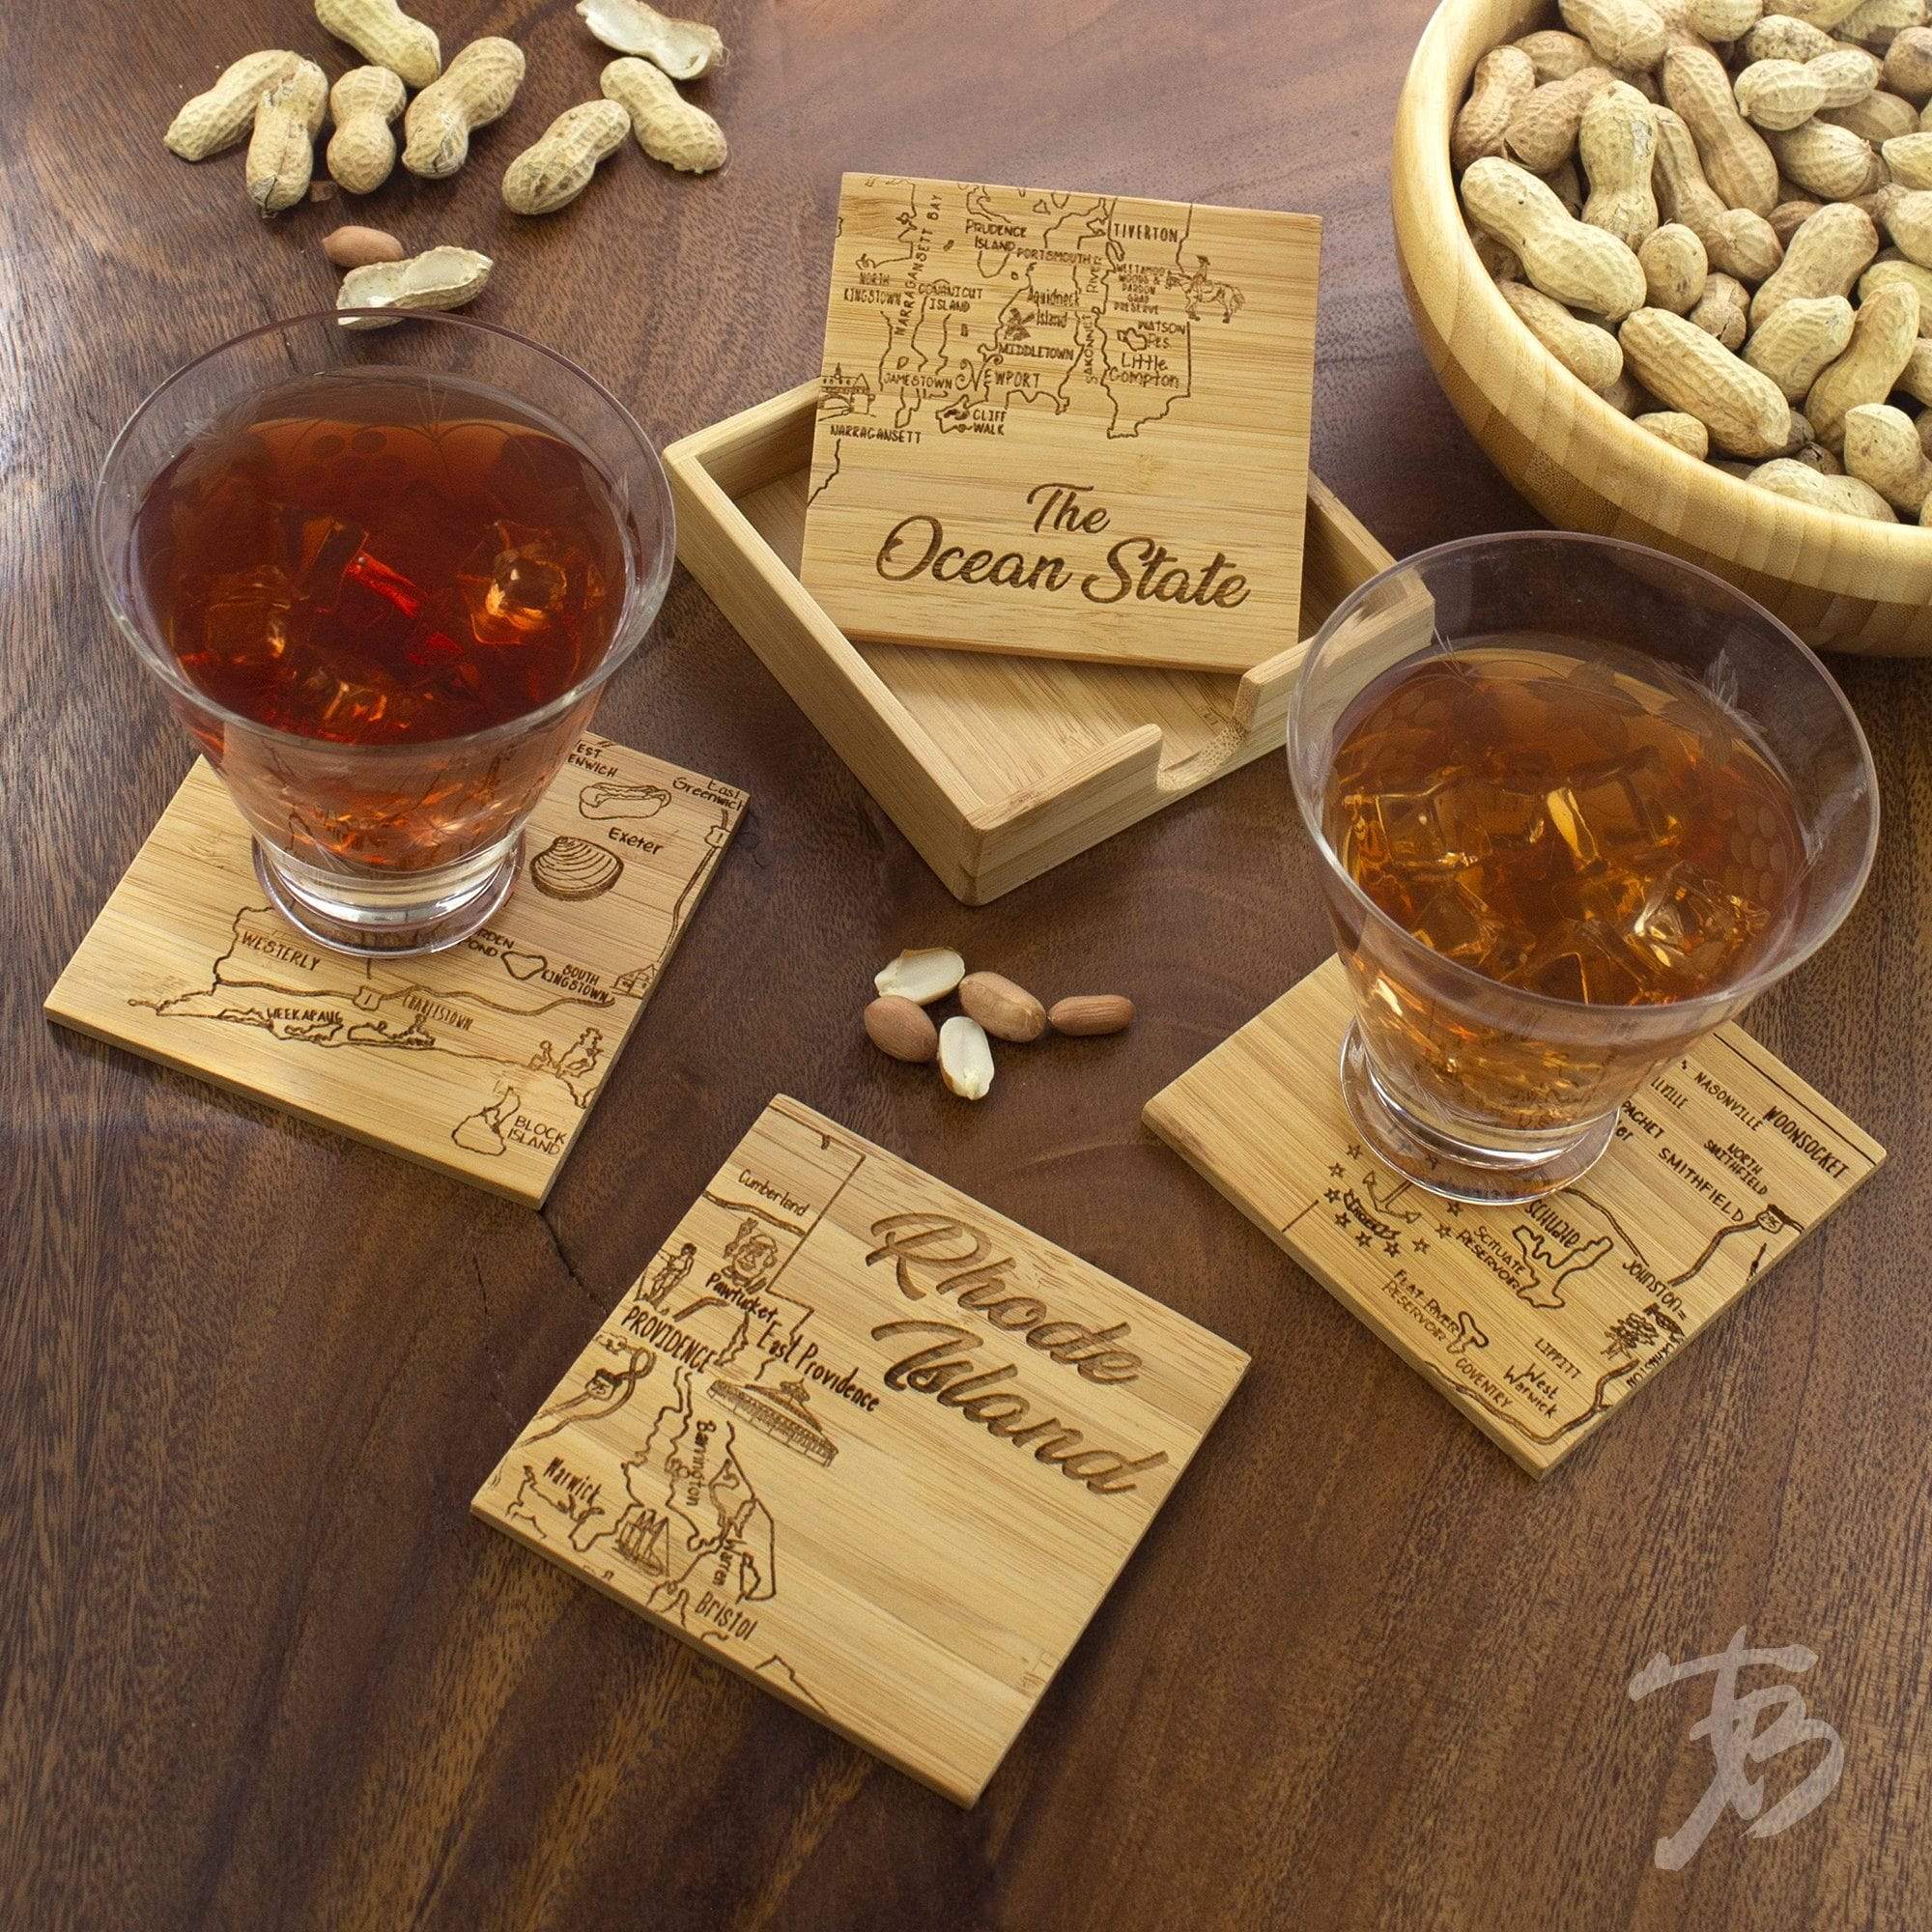 Totally Bamboo Rhode Island State Puzzle 4 Piece Bamboo Coaster Set with Case